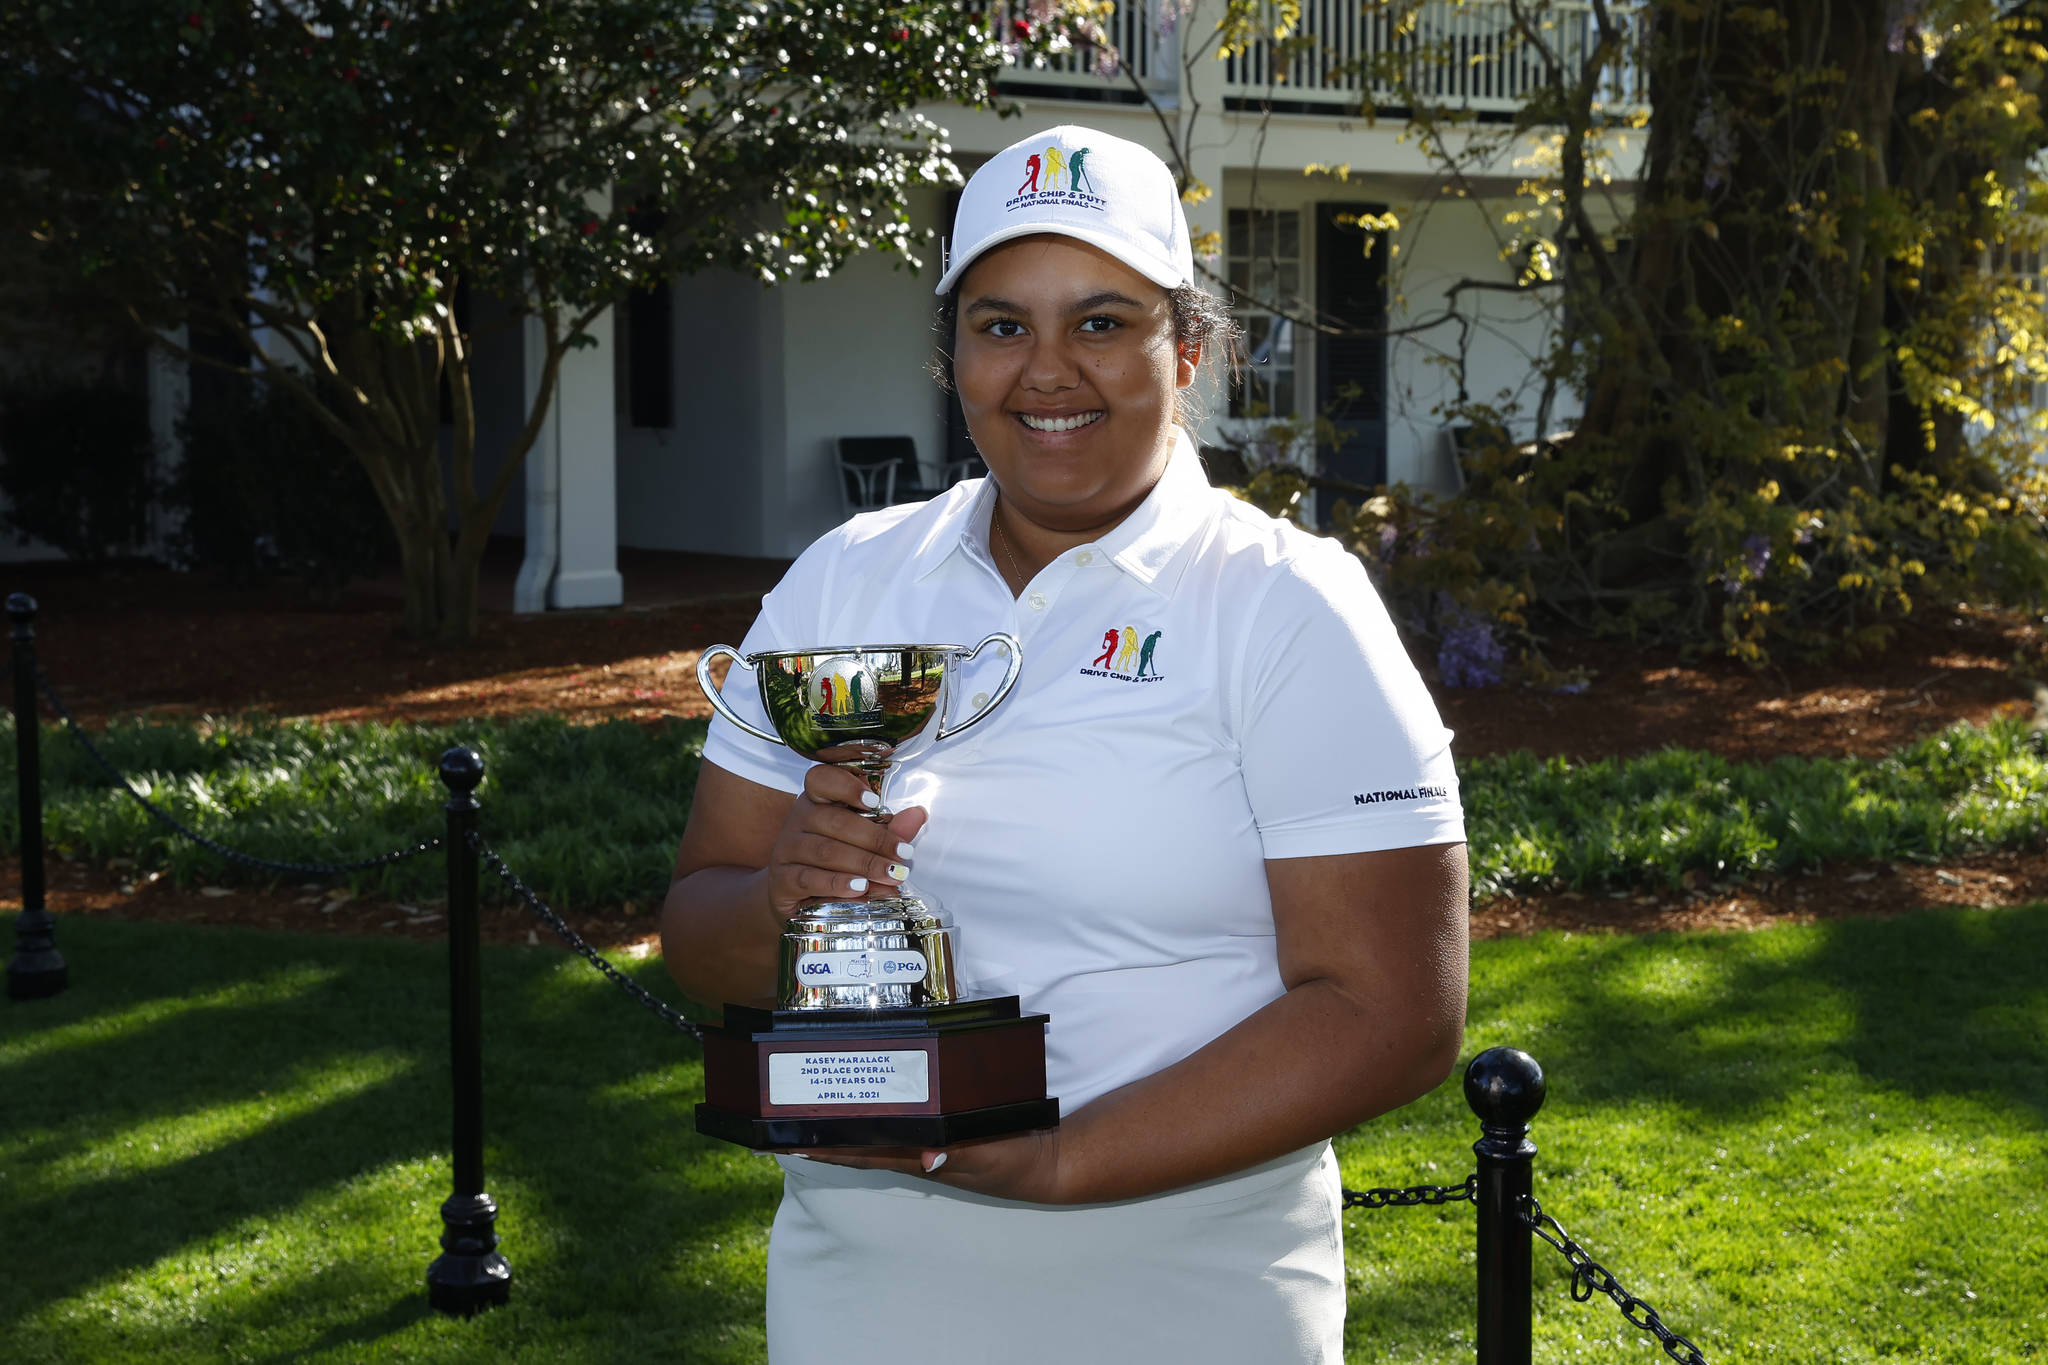 Contributed photo
Kasey Maralack in the Girls 14-15 age group holds her trophy during the Drive, Chip and Putt National Finals at Augusta National Golf Club, Sunday, April 4, 2021.